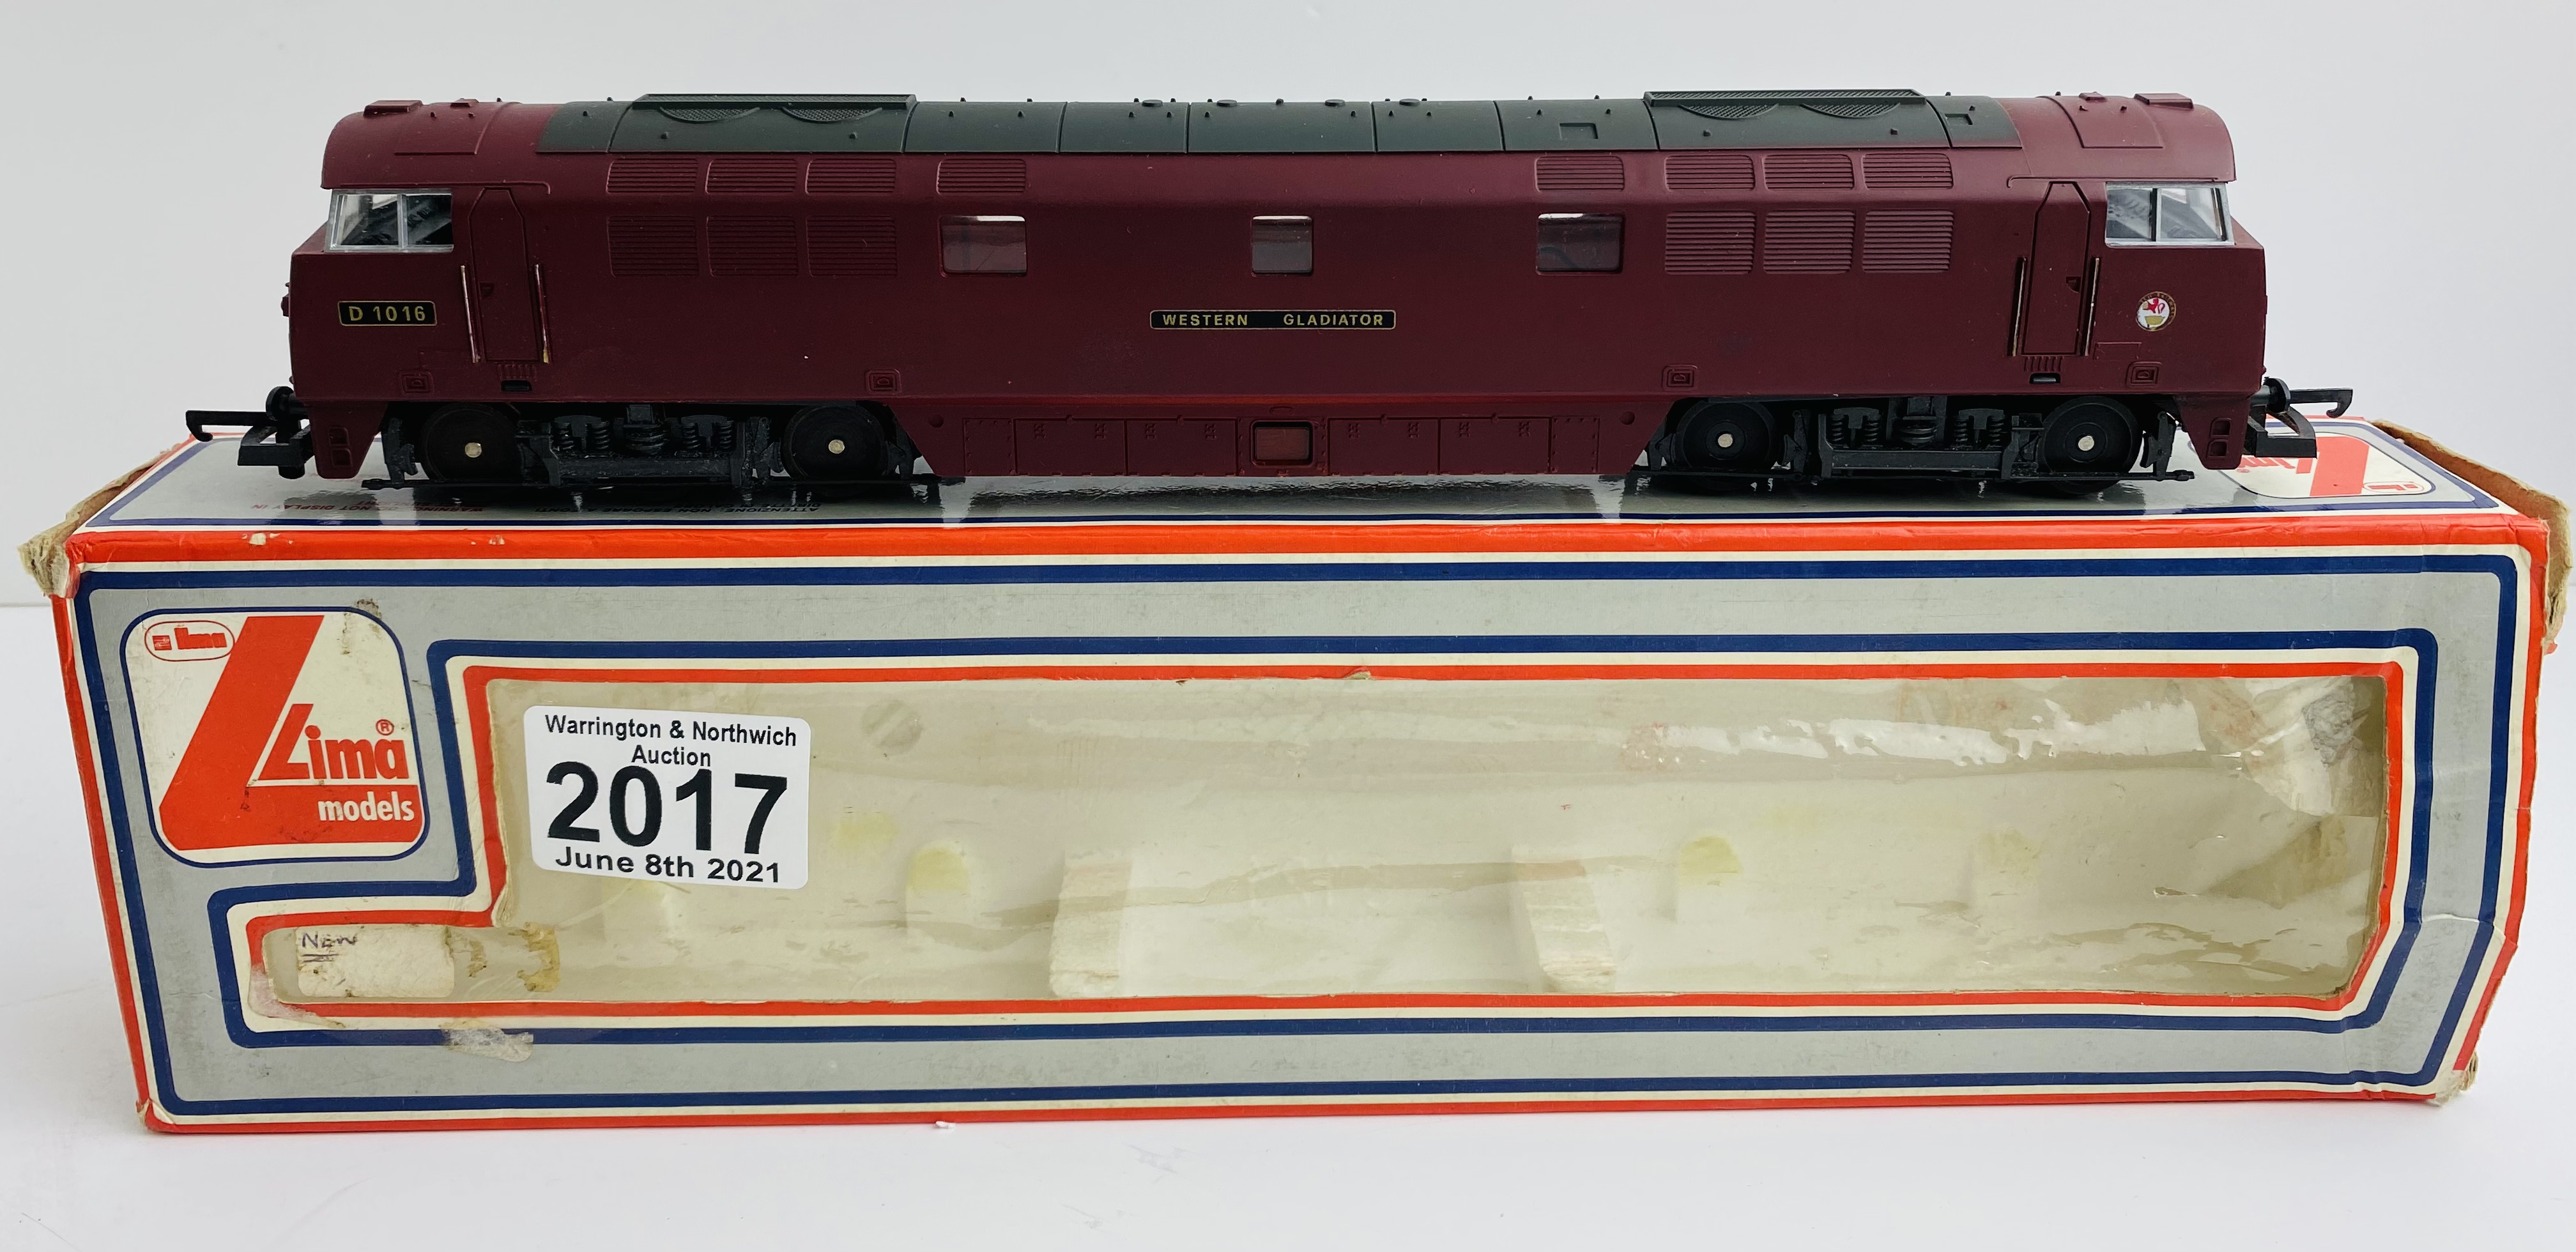 Lima OO Gauge 'Western Gladiator' Locomotive Boxed - P&P Group 1 (£14+VAT for the first lot and £1+